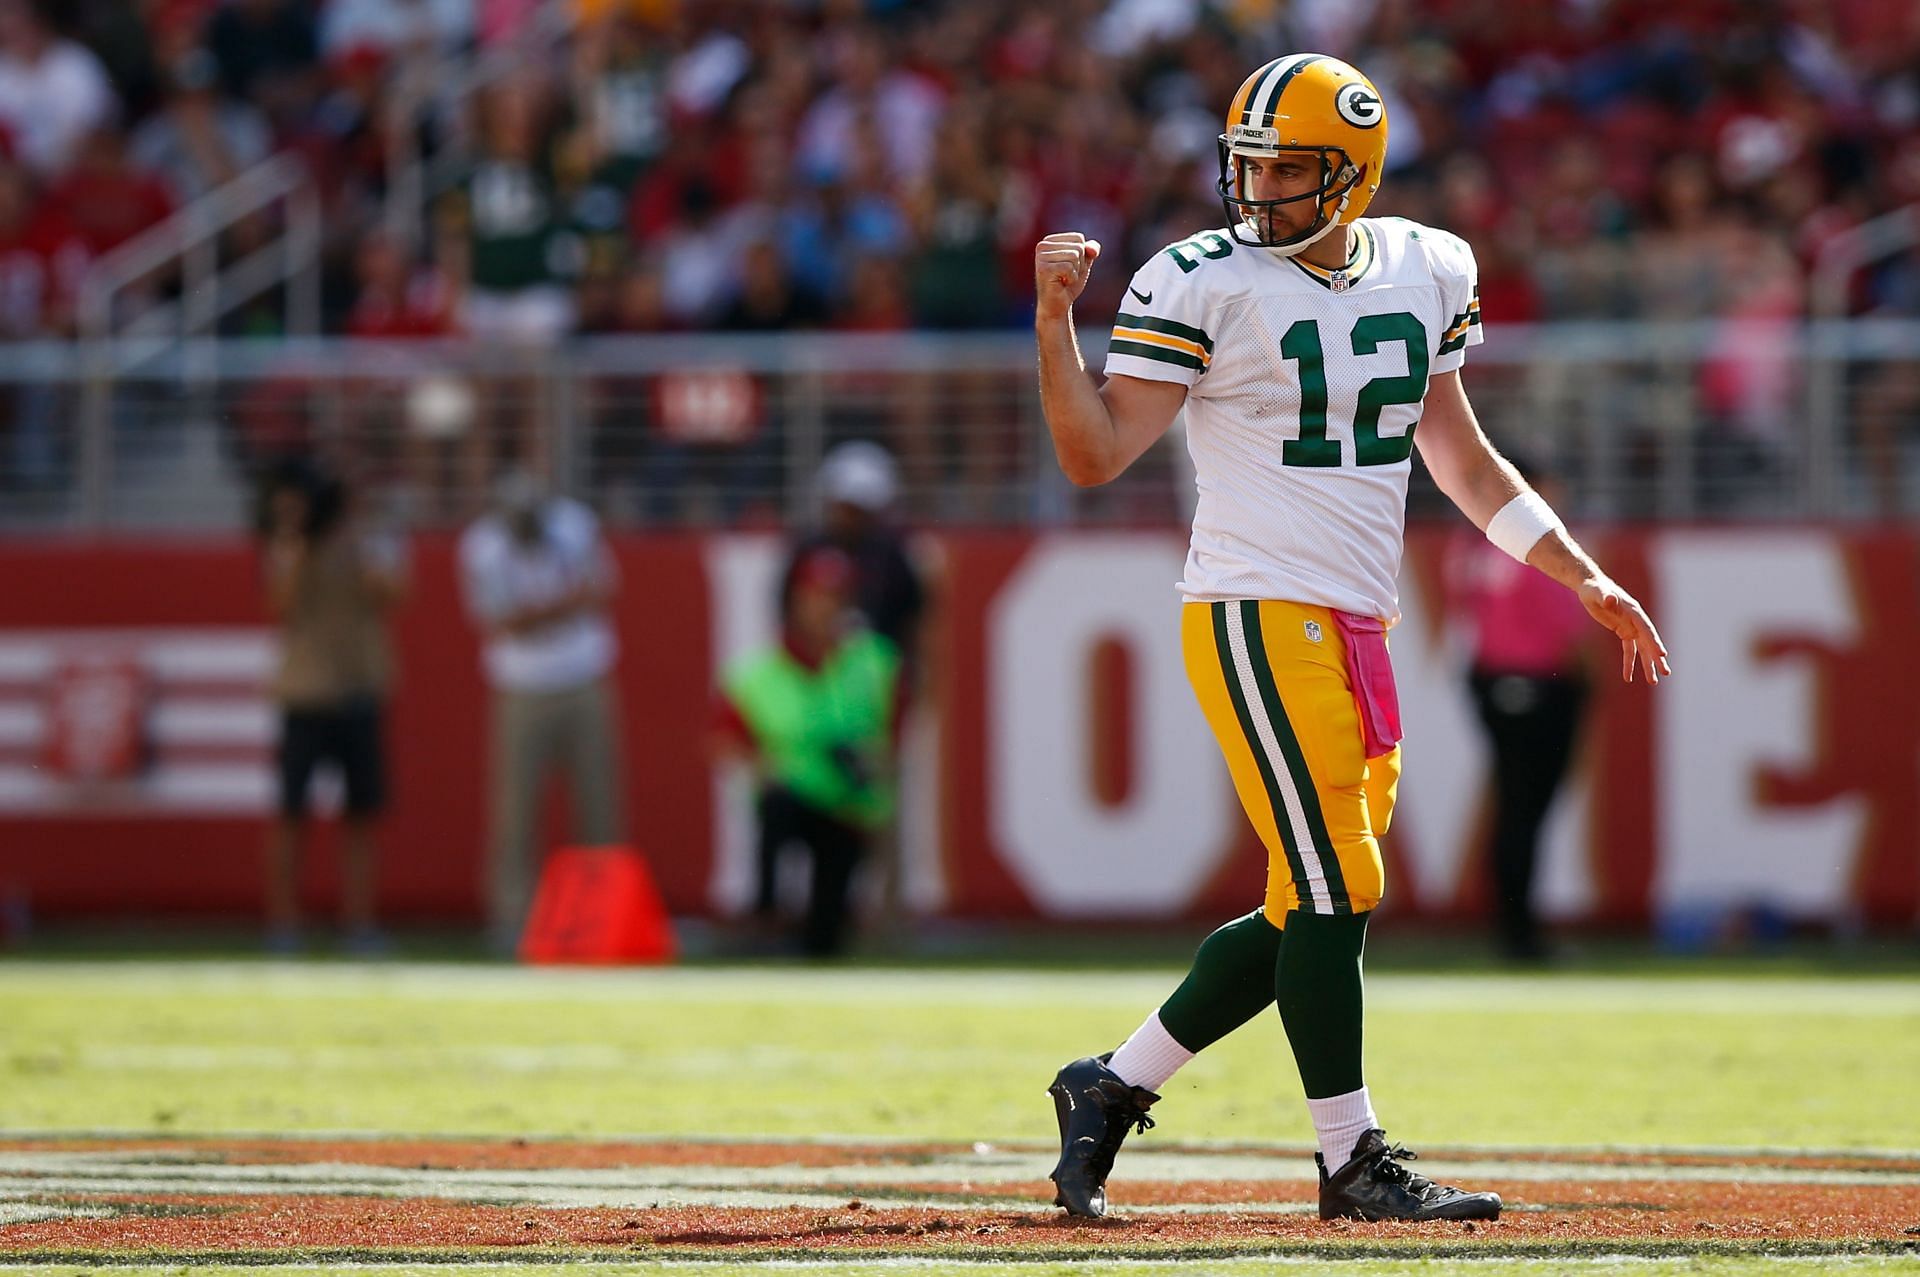 Green Bay Packers quarterback Aaron Rodgers seeks a second Super Bowl ring